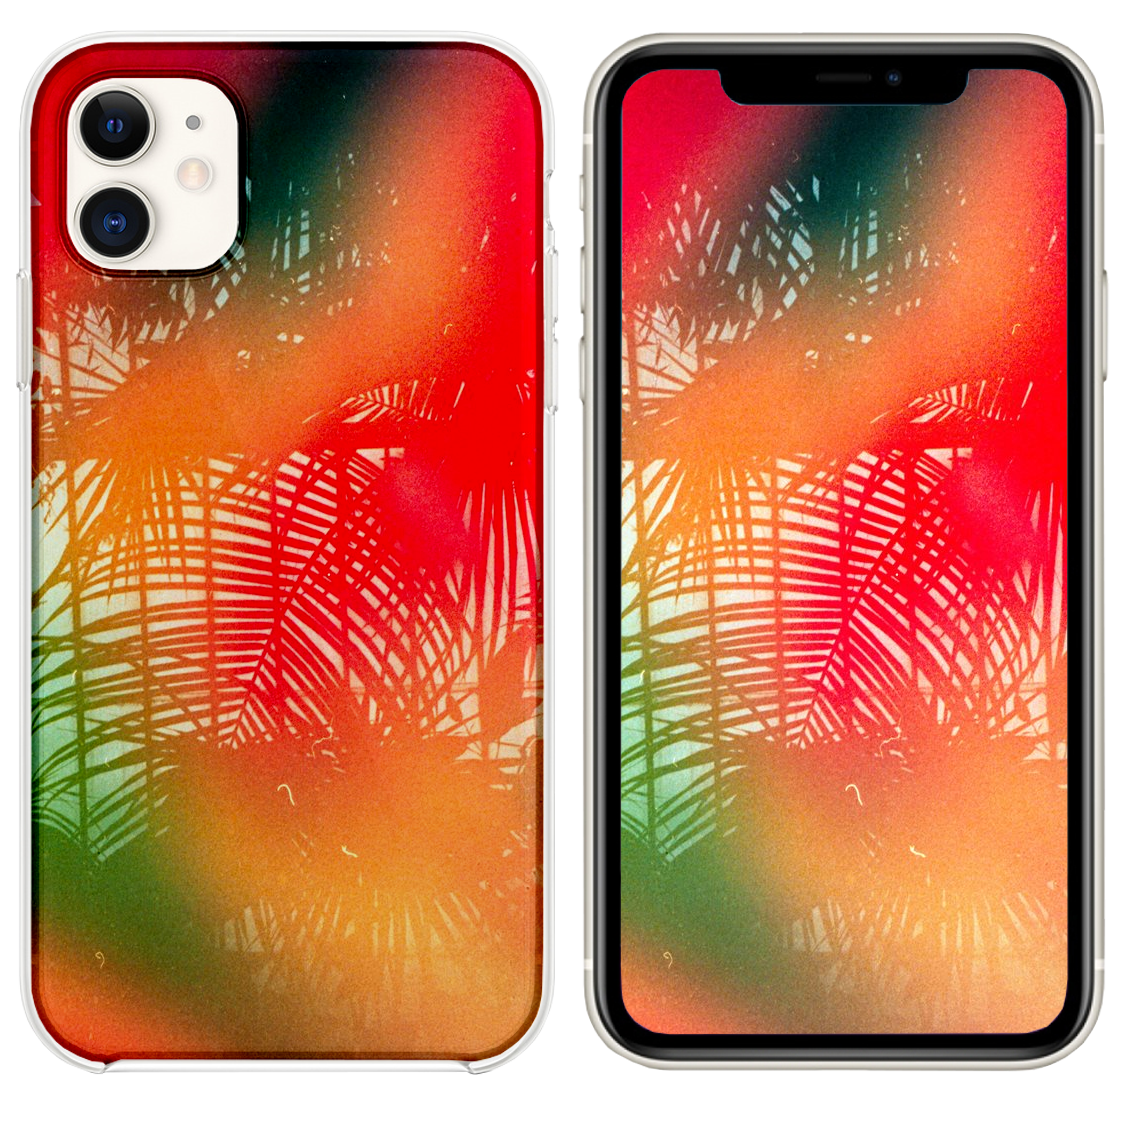 Art Drawn iPhone Cases And Wallpaper